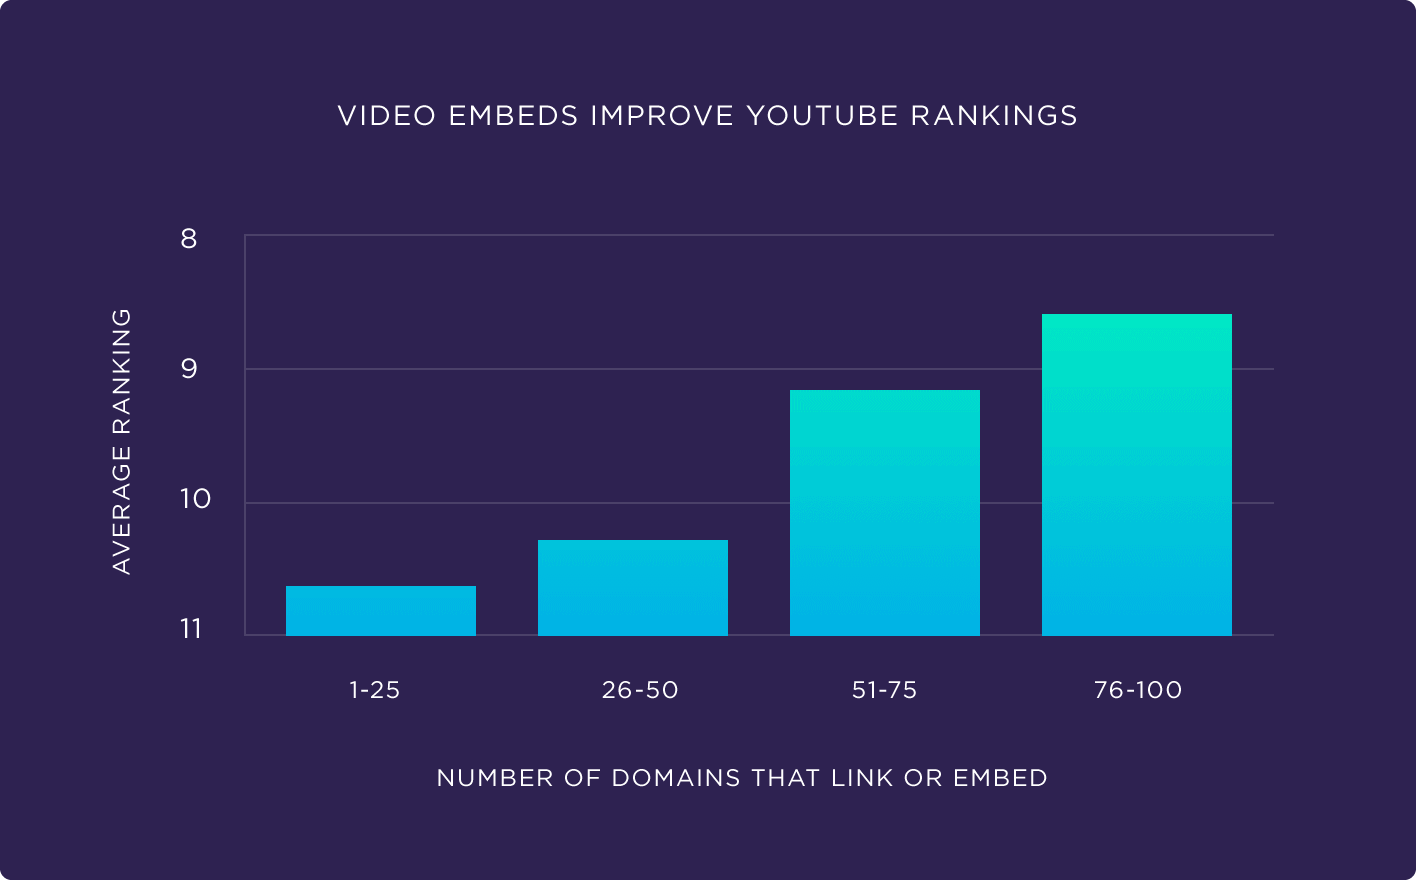 Video embeds improve YouTube rankings